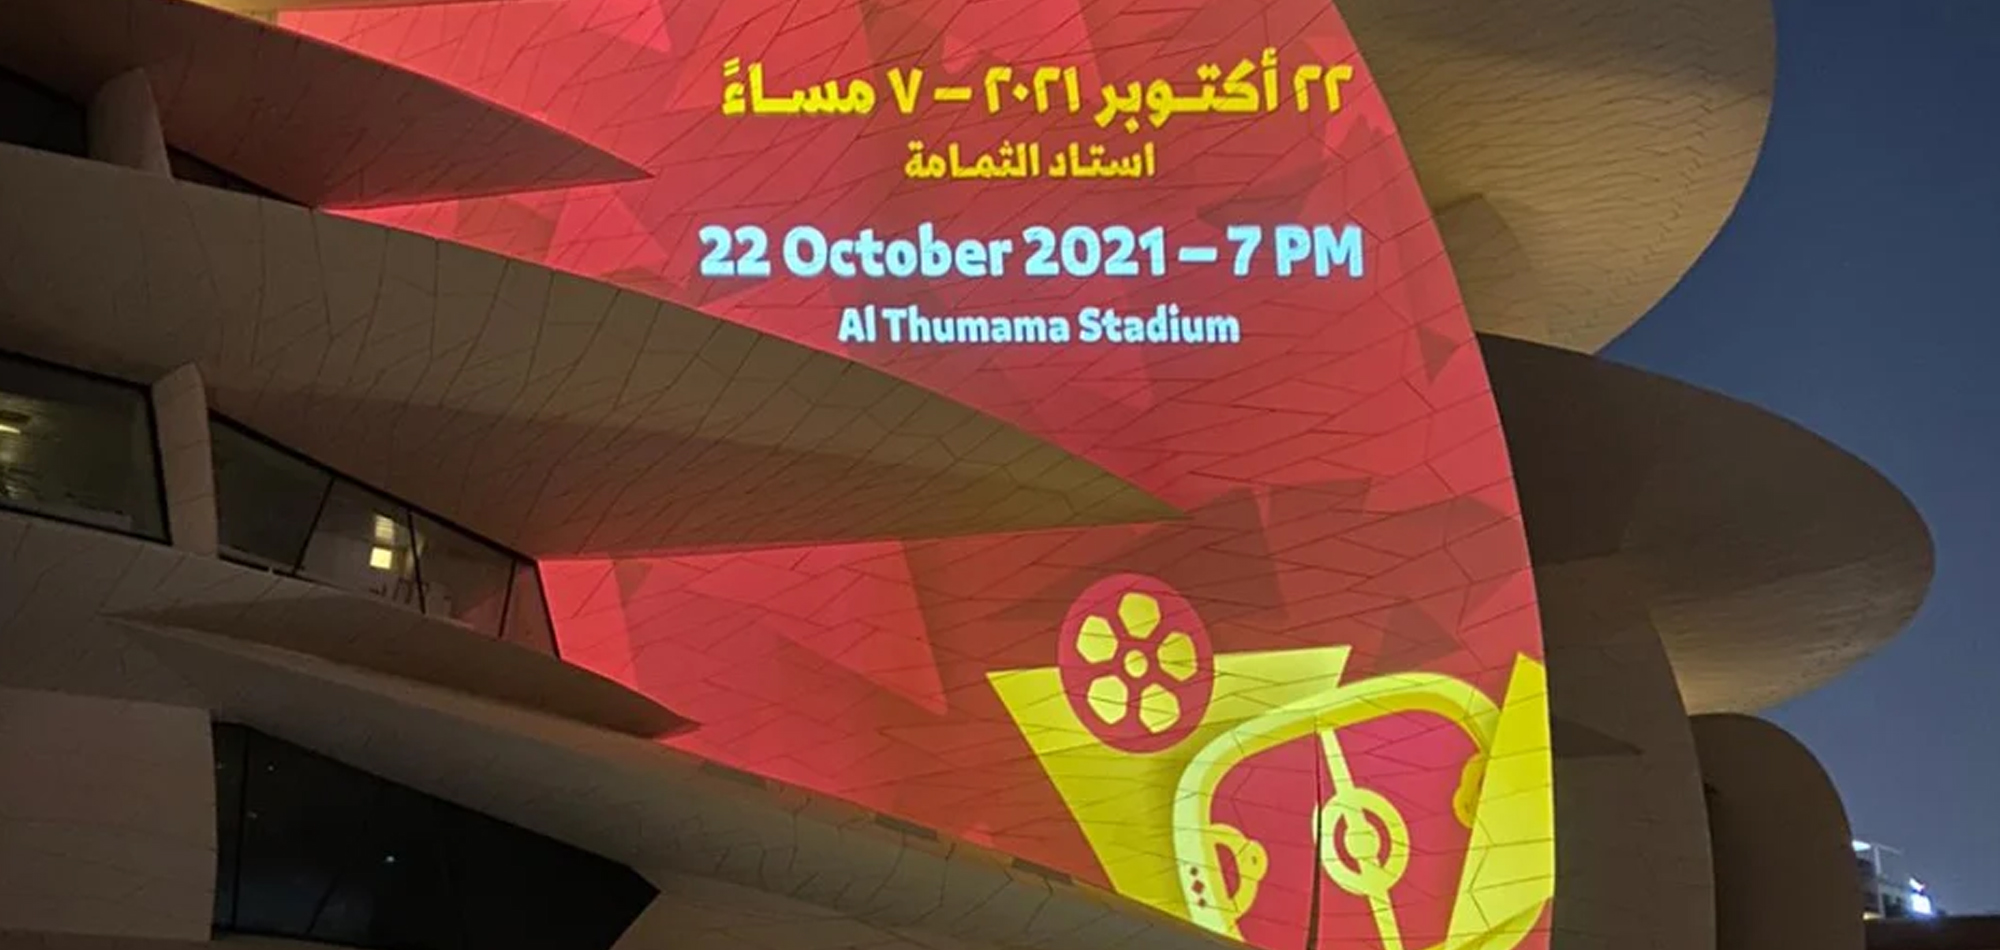 Community engagement at the heart of preparations for inauguration of Al Thumama Stadium